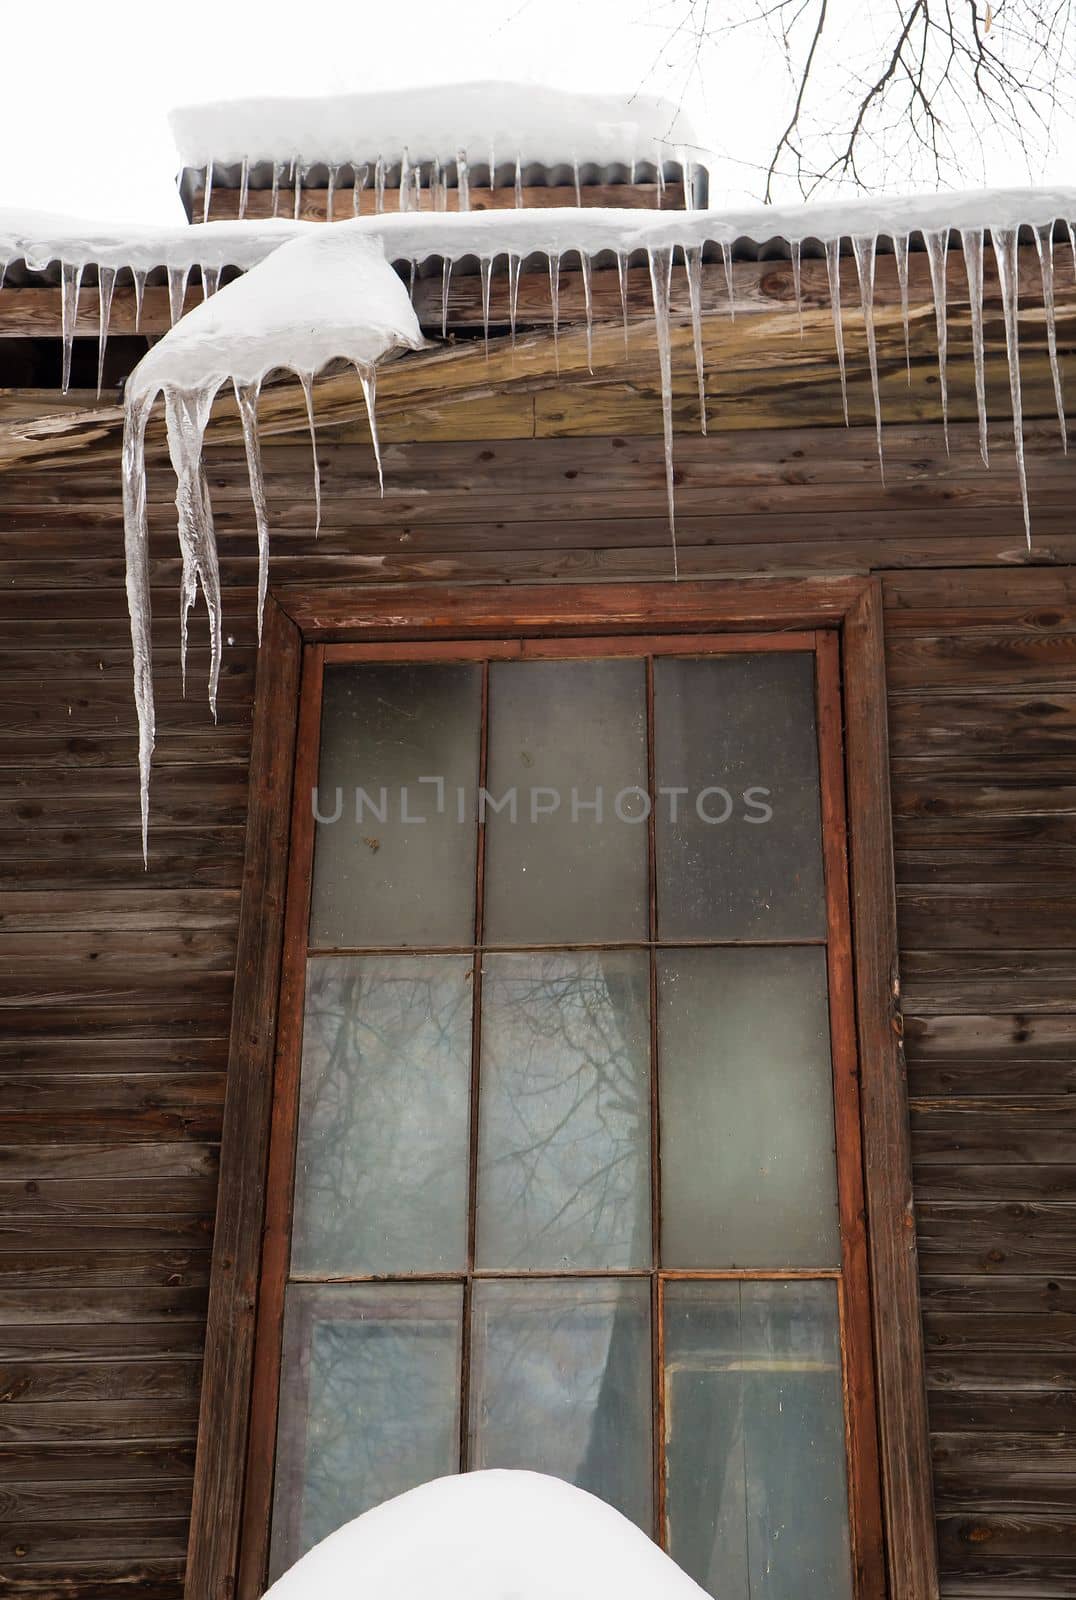 Icy, small icicles hang on the edge of the roof, winter or spring. Plank wall of an old wooden house with windows. Large cascades of icicles in smooth, beautiful rows. Cloudy winter day, soft light.